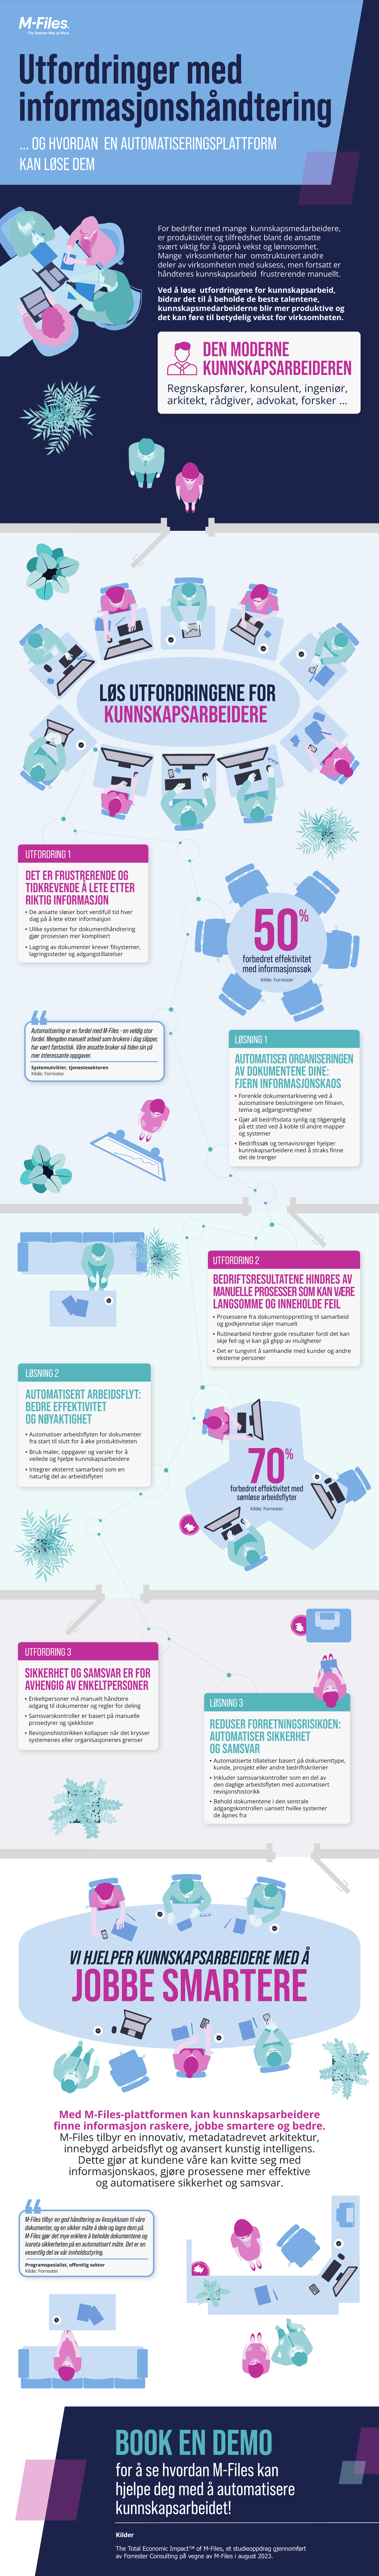 Infographic - Knowledge Work Automation - NO (ID 438475)